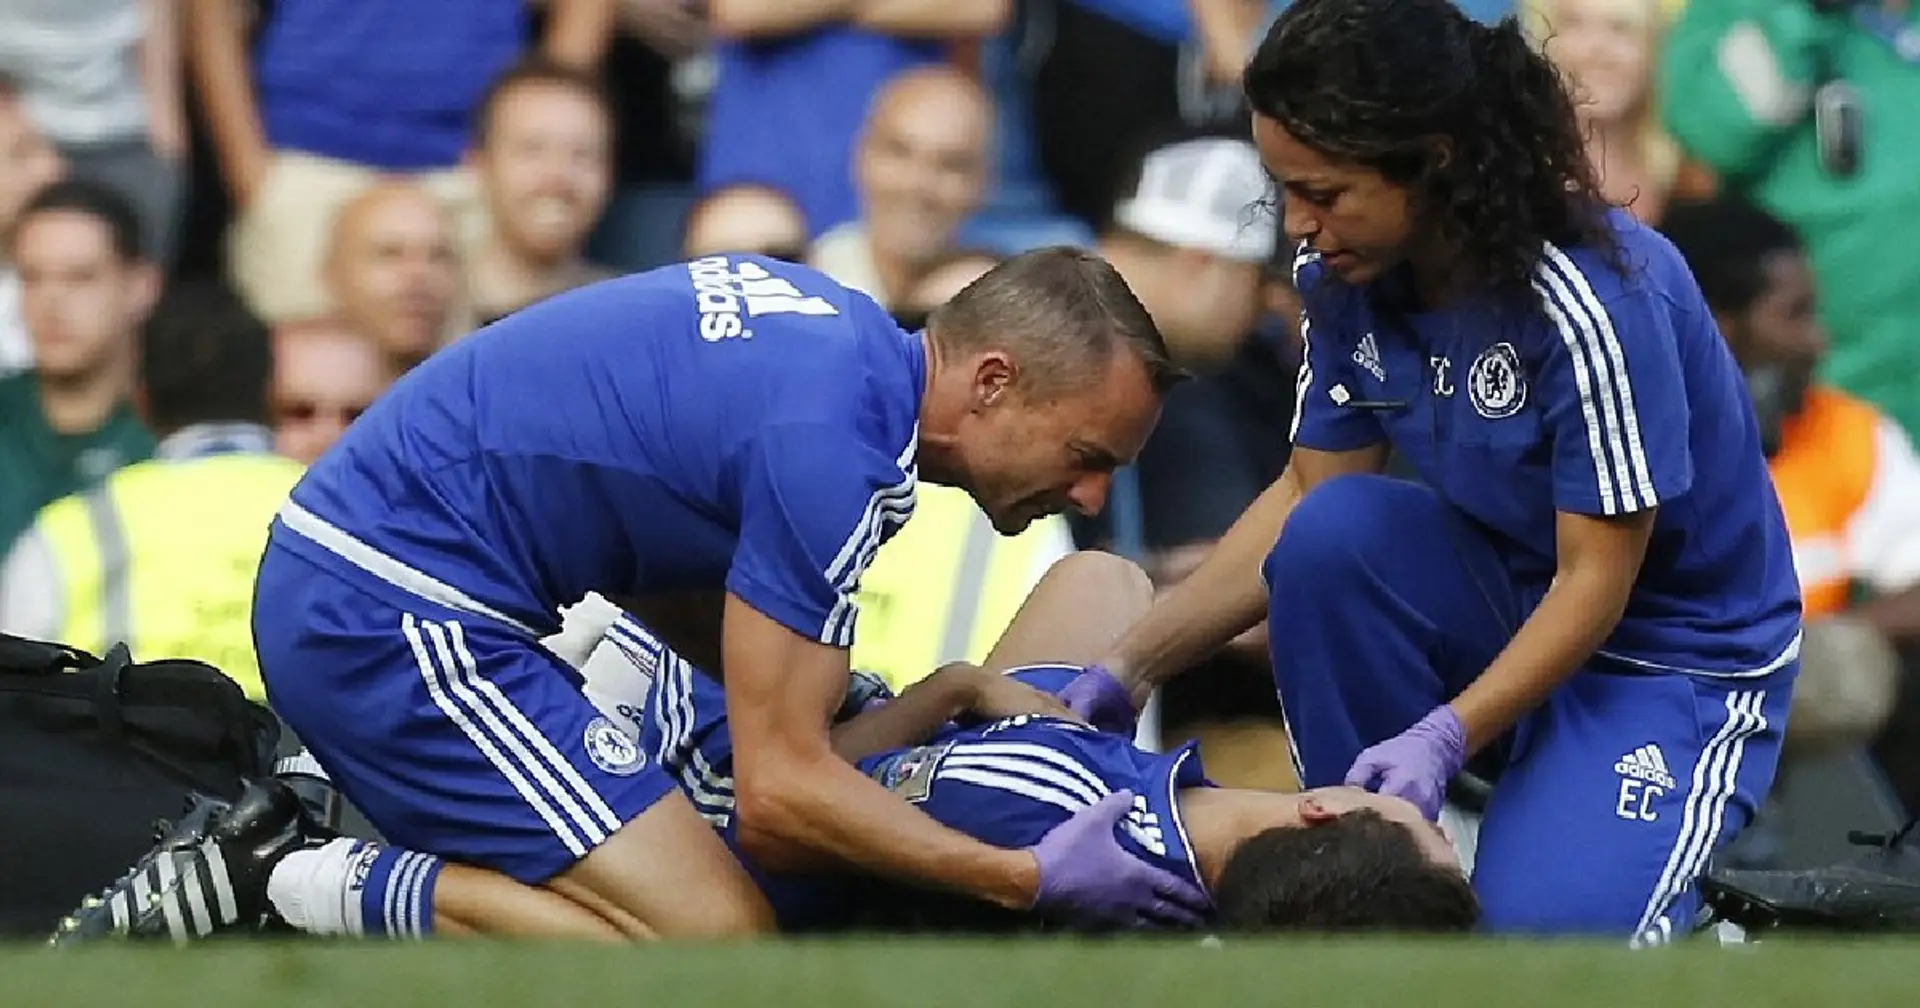 Head physiotherapist Thierry Laurent to leave Chelsea